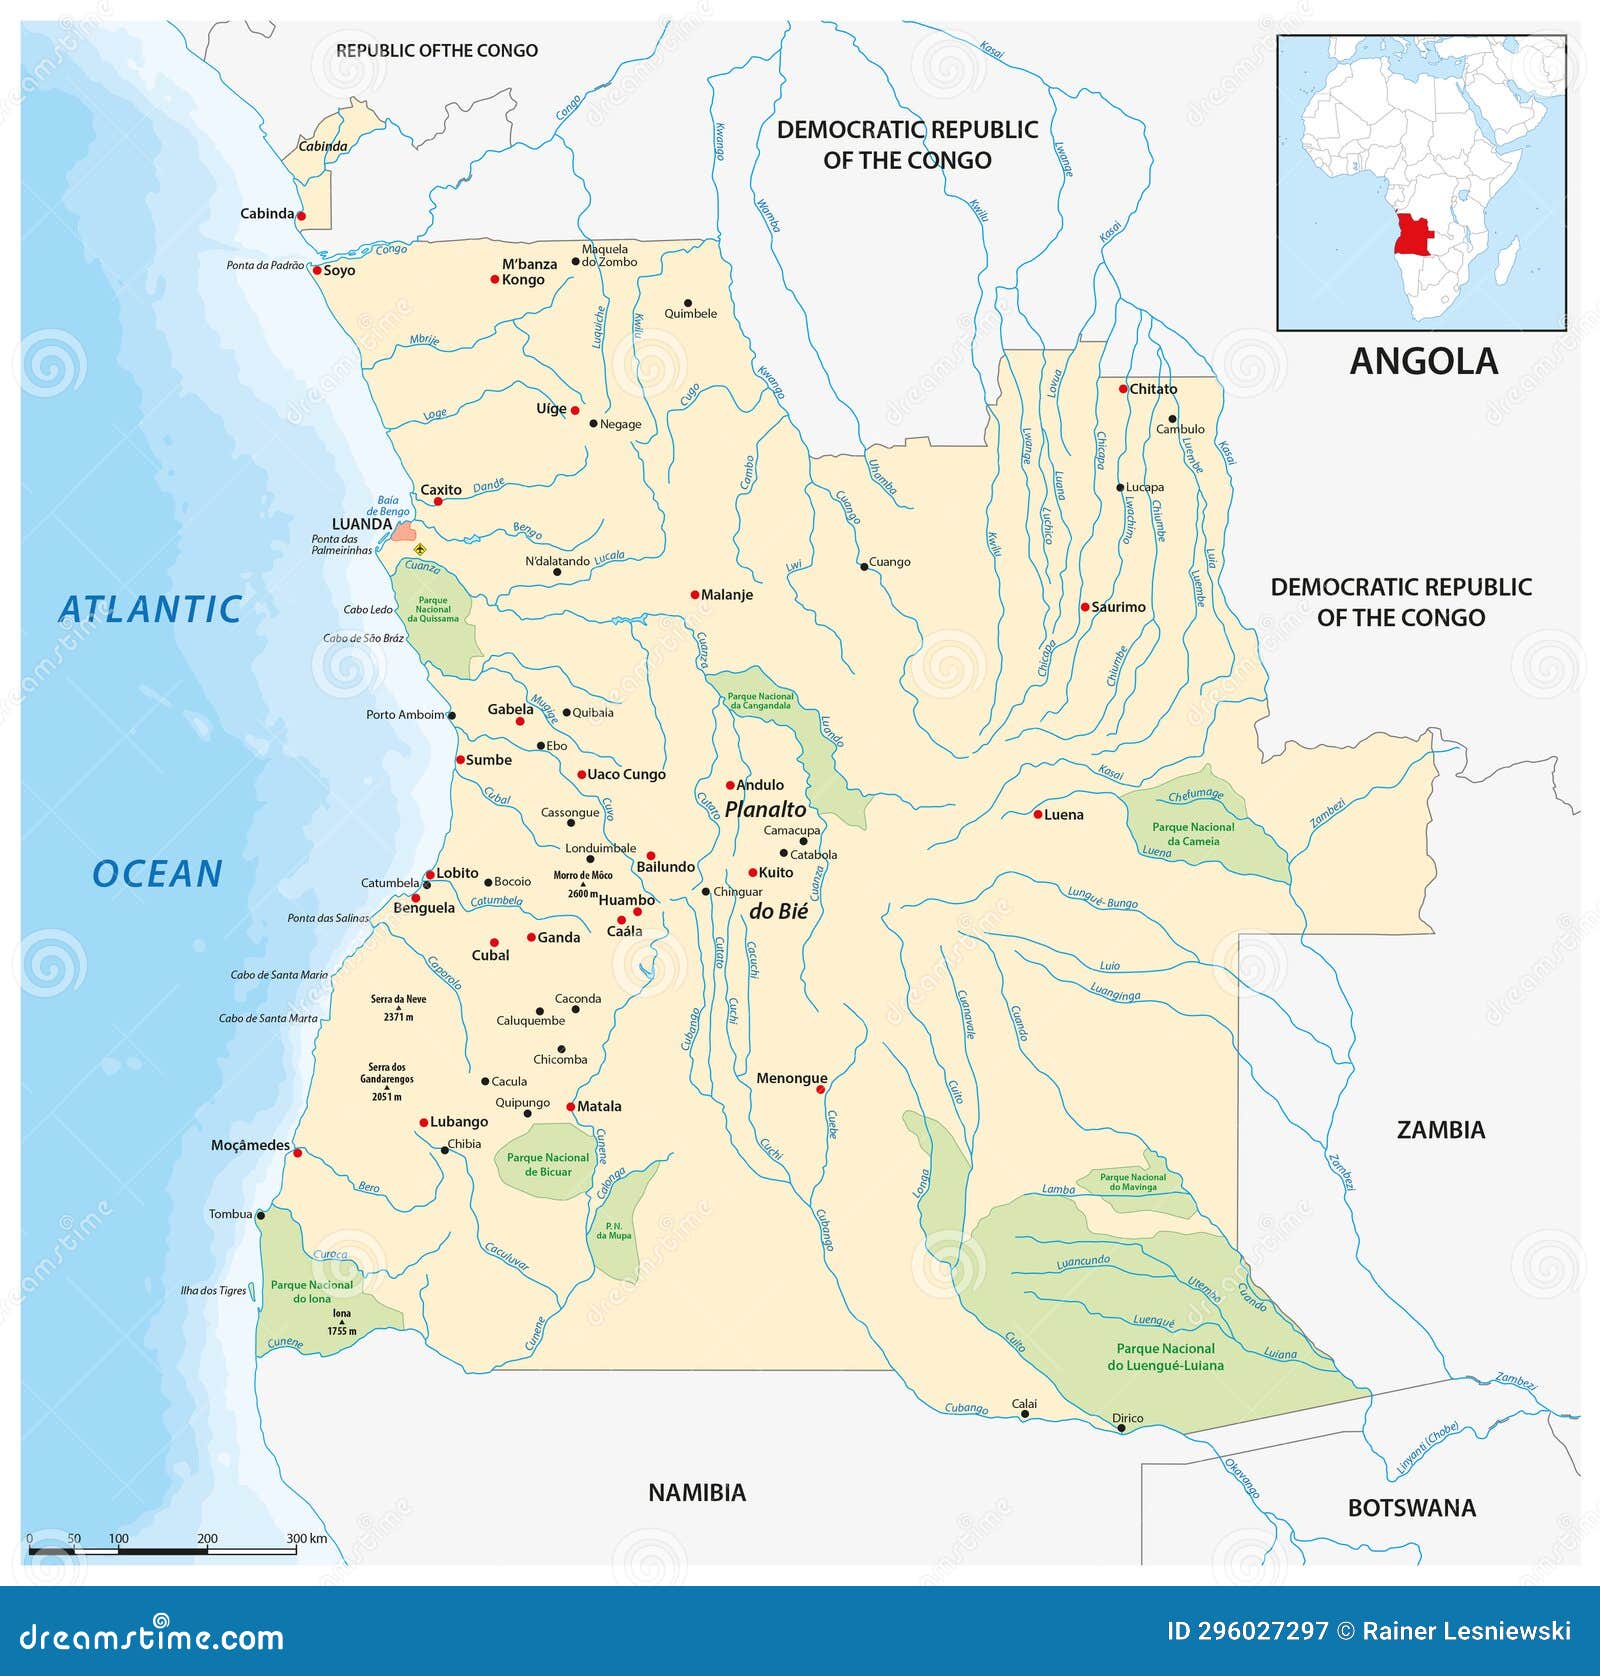  map of the southwest african state of angola